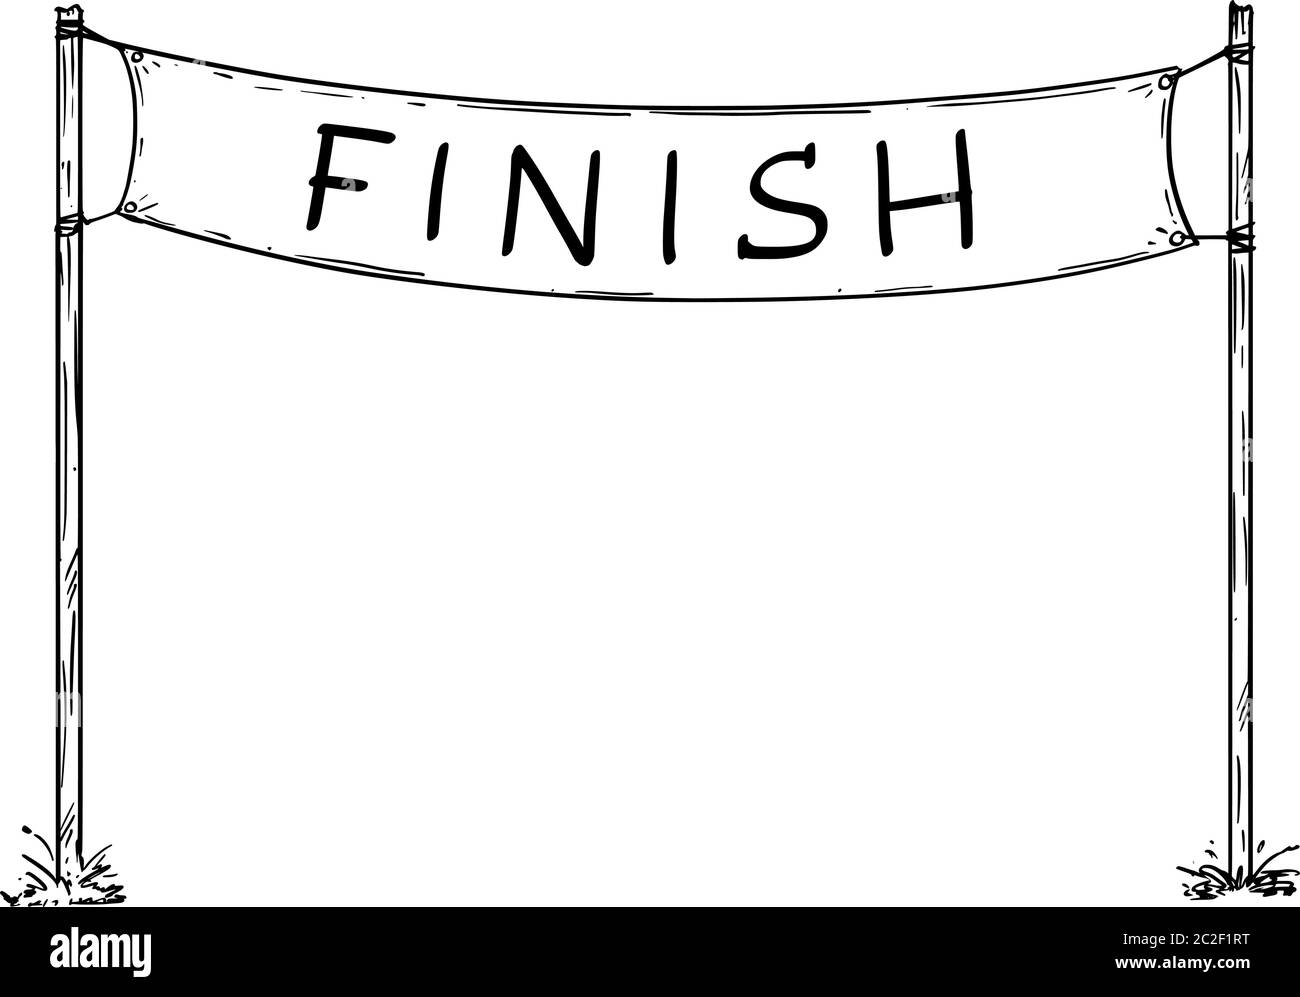 Hand drawn vector of empty race finish line sign or circuit finishing line banner. Business or career concept. Stock Vector